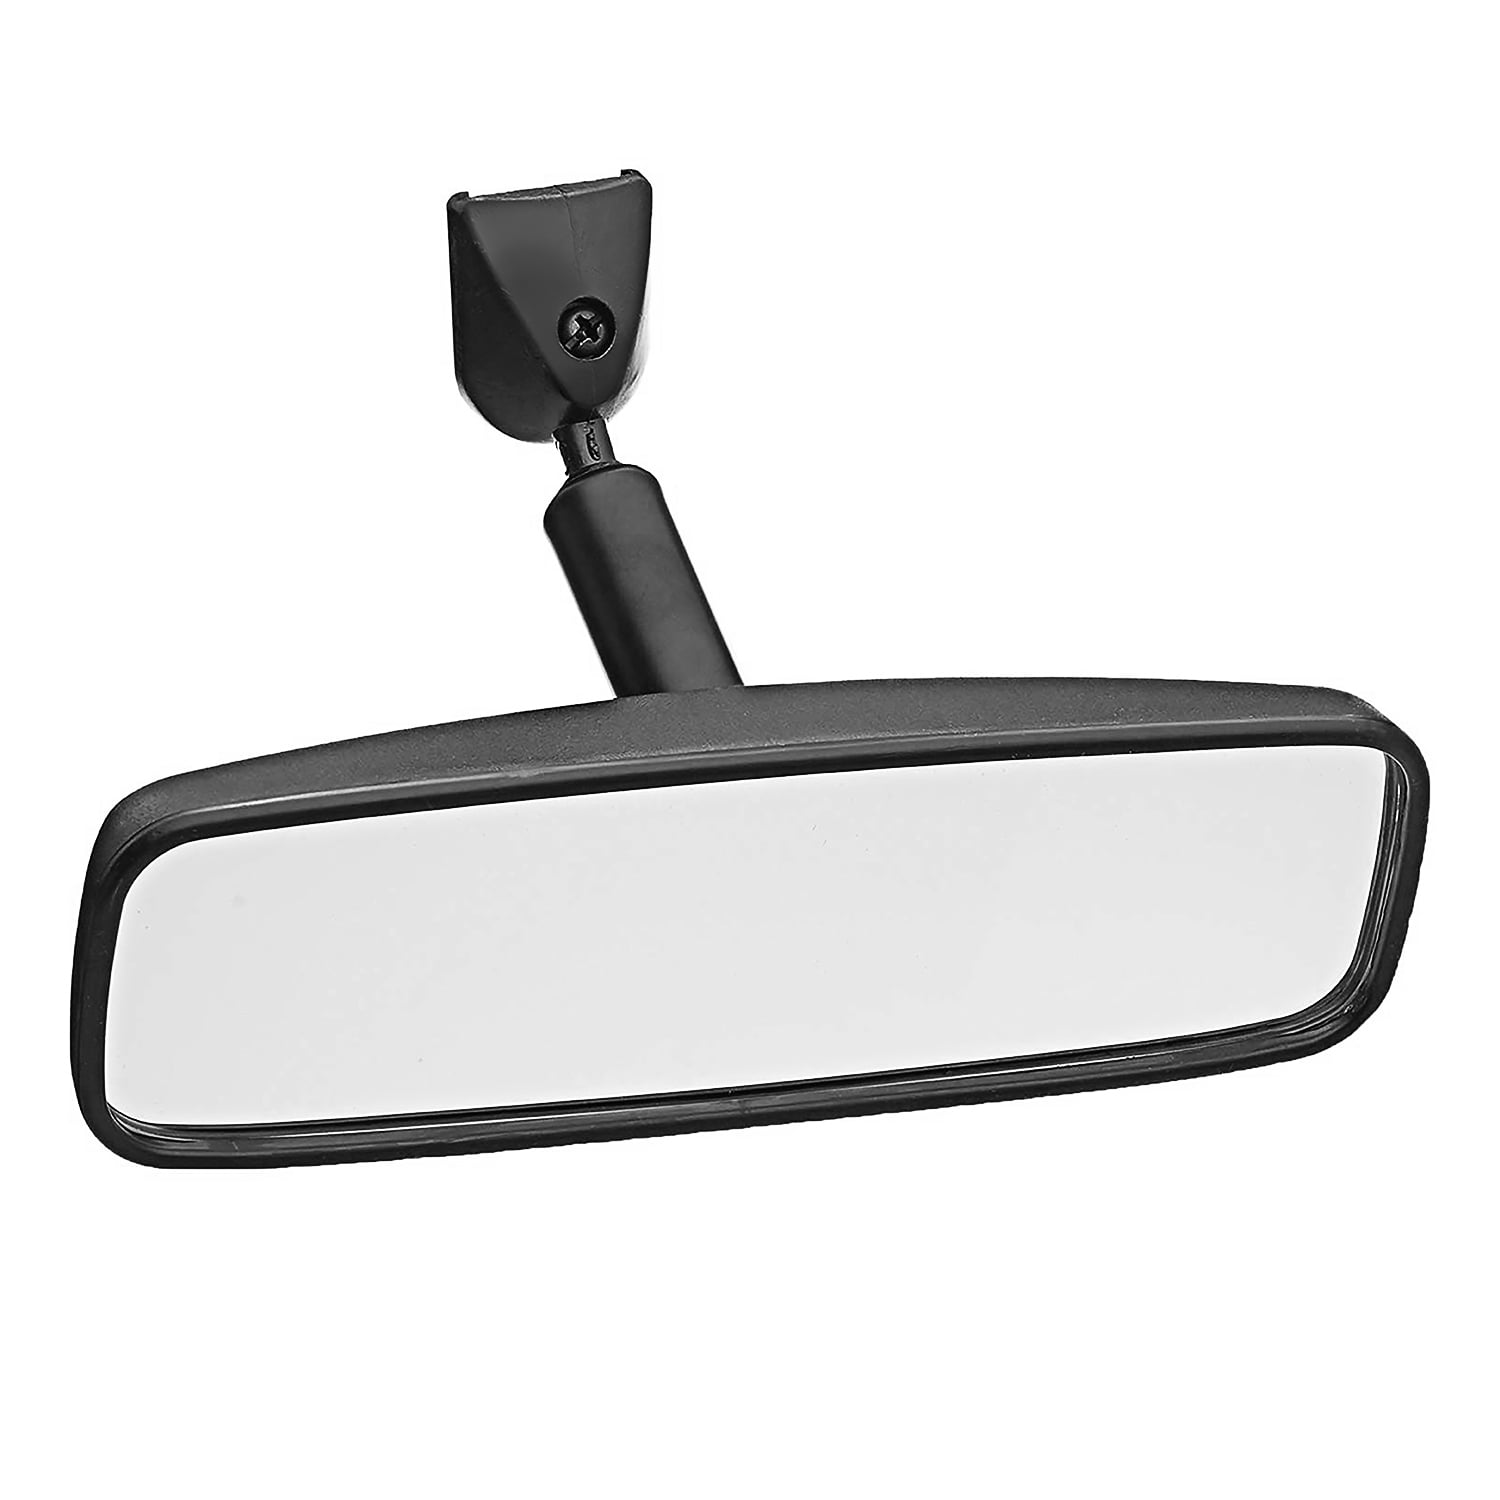 Day/Night Fits OEM Mounting CIPA Mirrors 33000 Inside Rear View Mirror 12 in